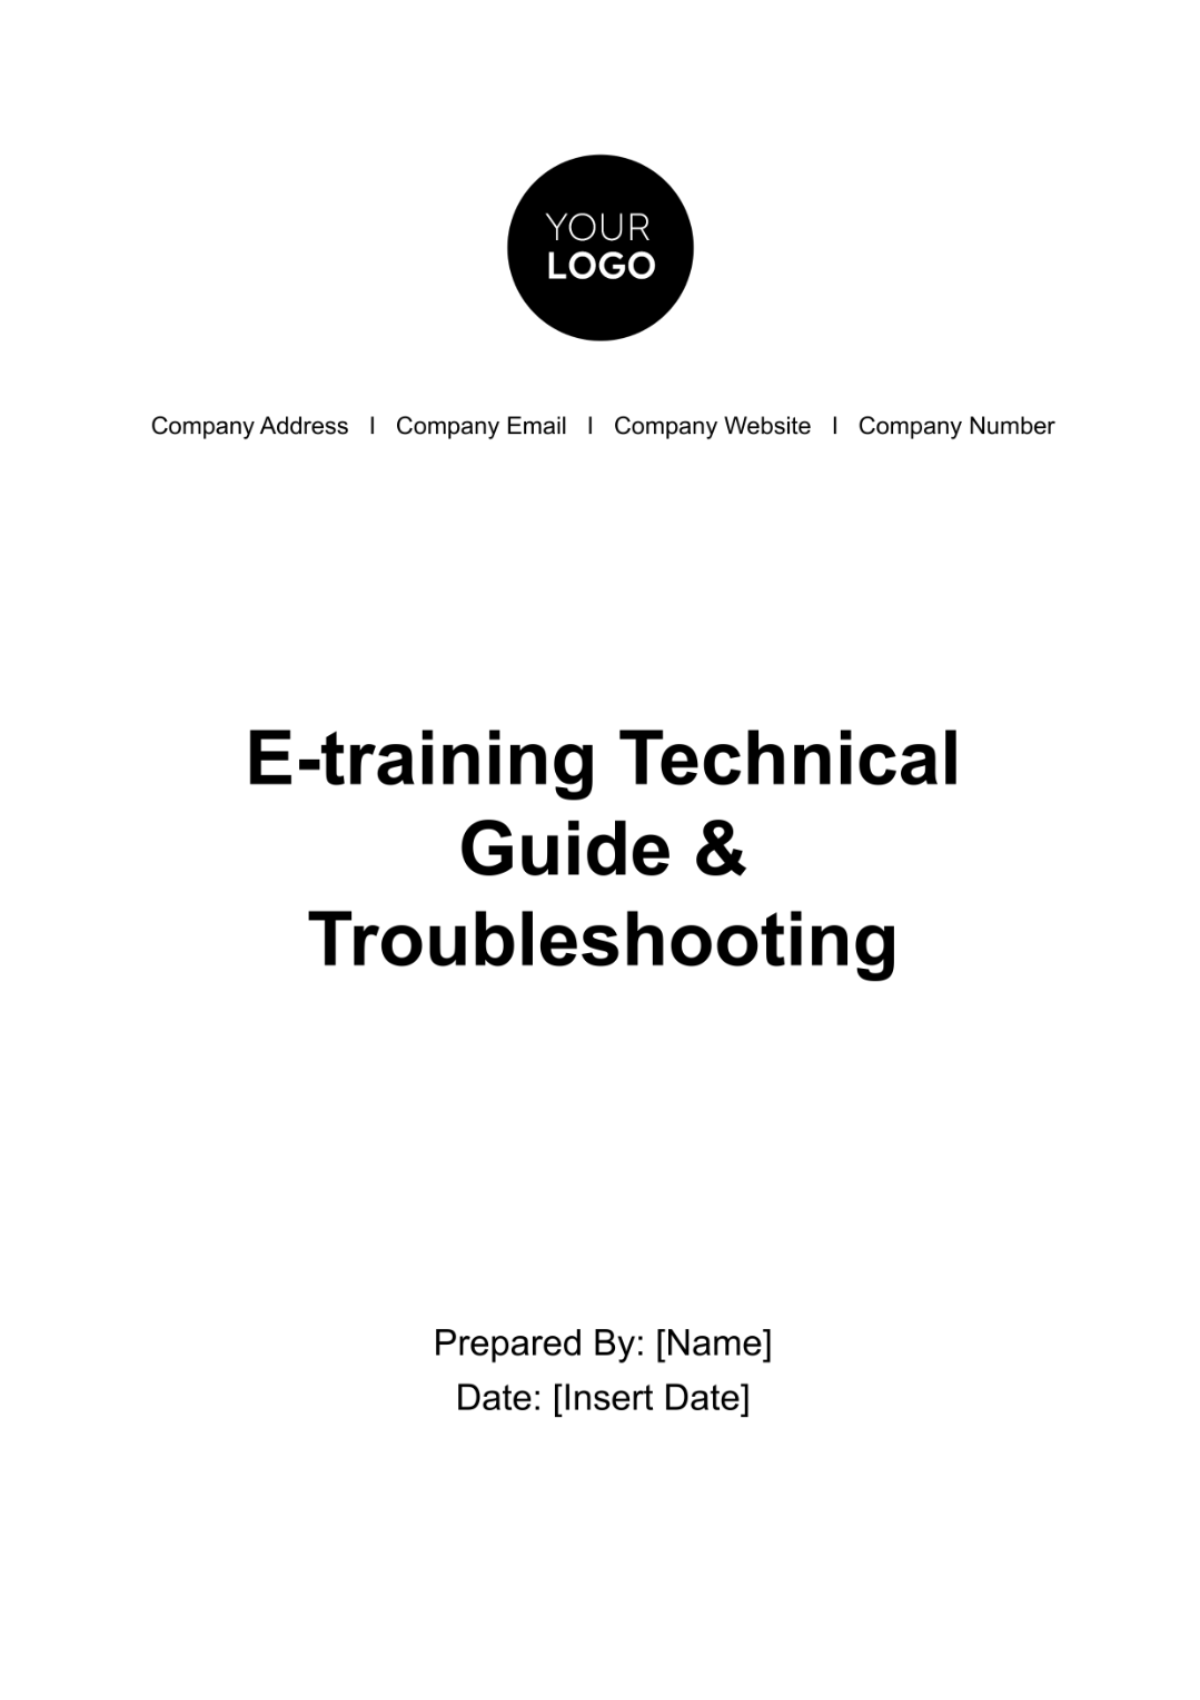 Free E-training Technical Guide & Troubleshooting HR Template